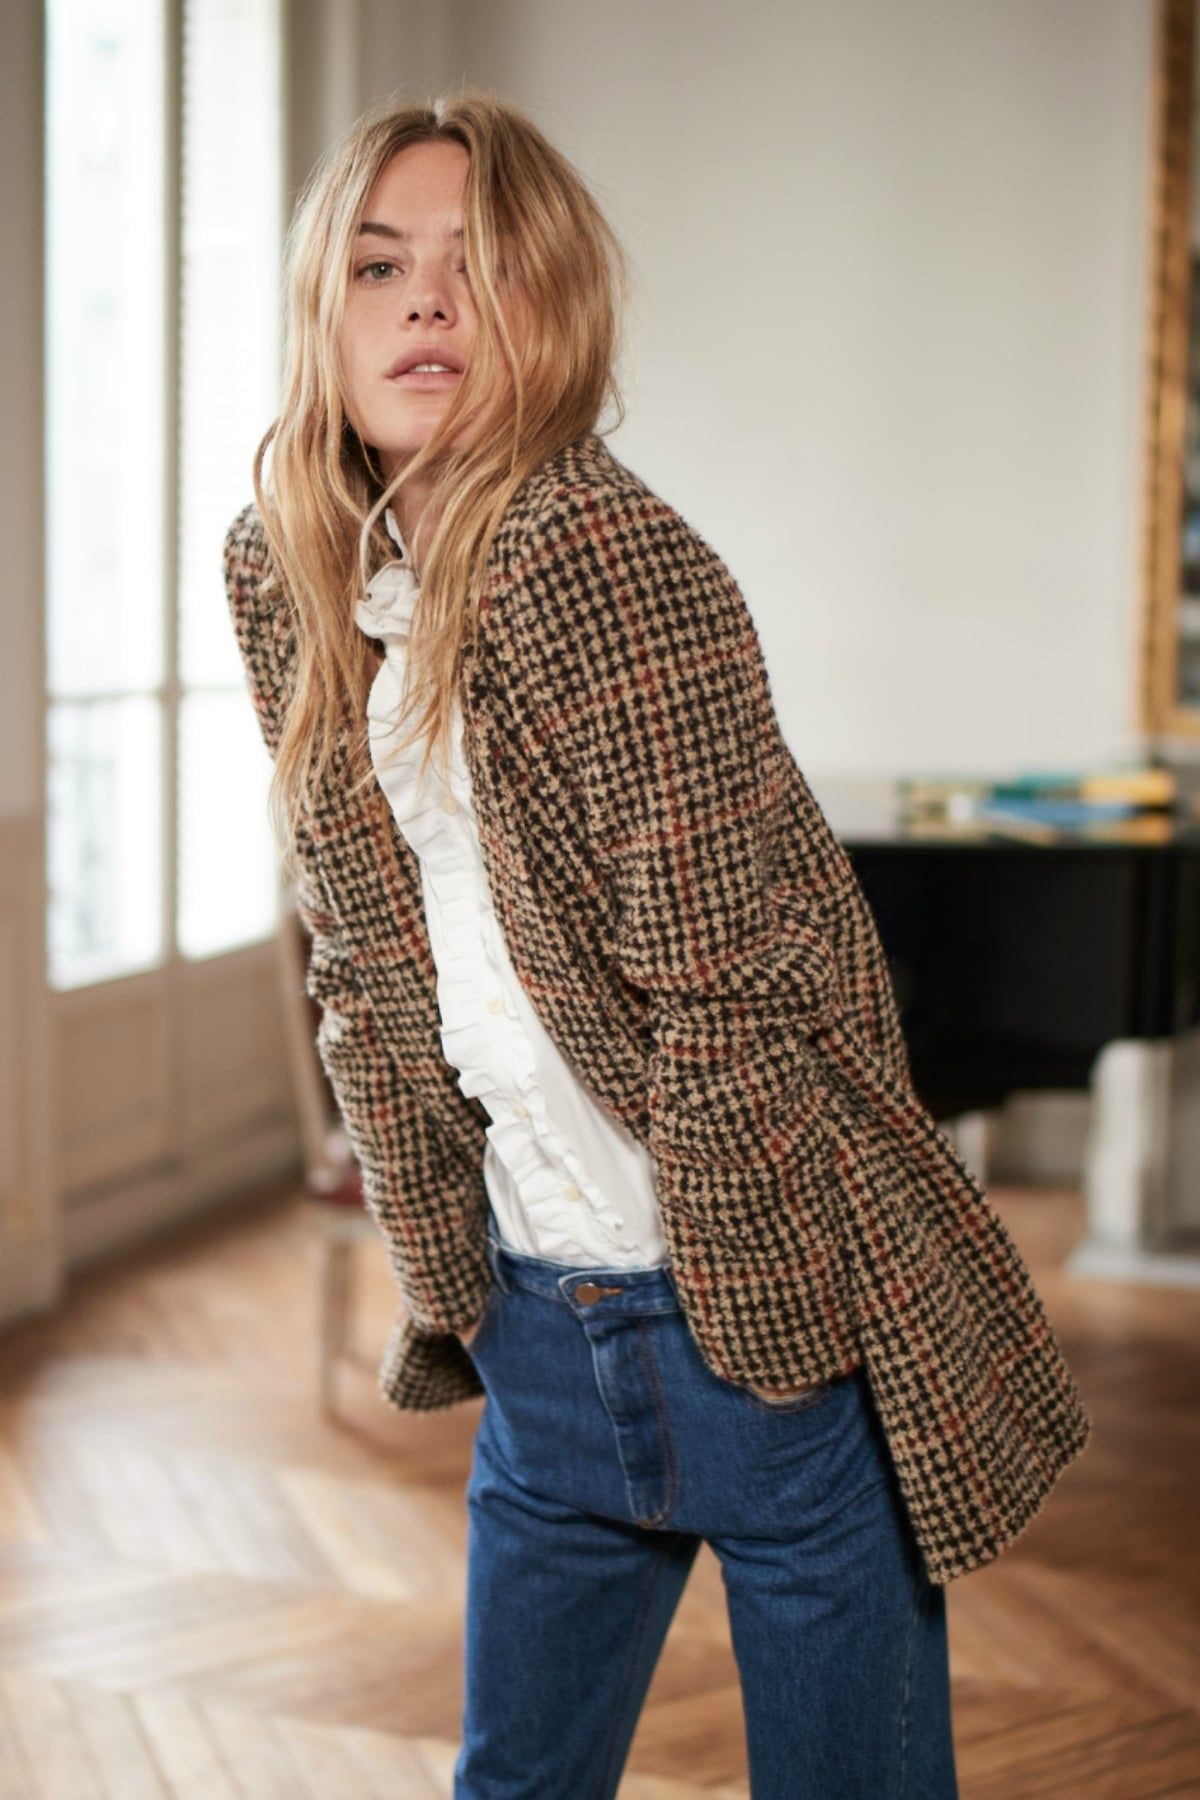 Casual Brown Checkered Blazer Outfit: Casual Plaid Blazer Style,  Checkered Blazer Outfit,  Stylish Plaid Blazer Street Style,  Plaid Blazer Style,  Plaid Blazer Outfit,  Plaid Blazer Ideas  